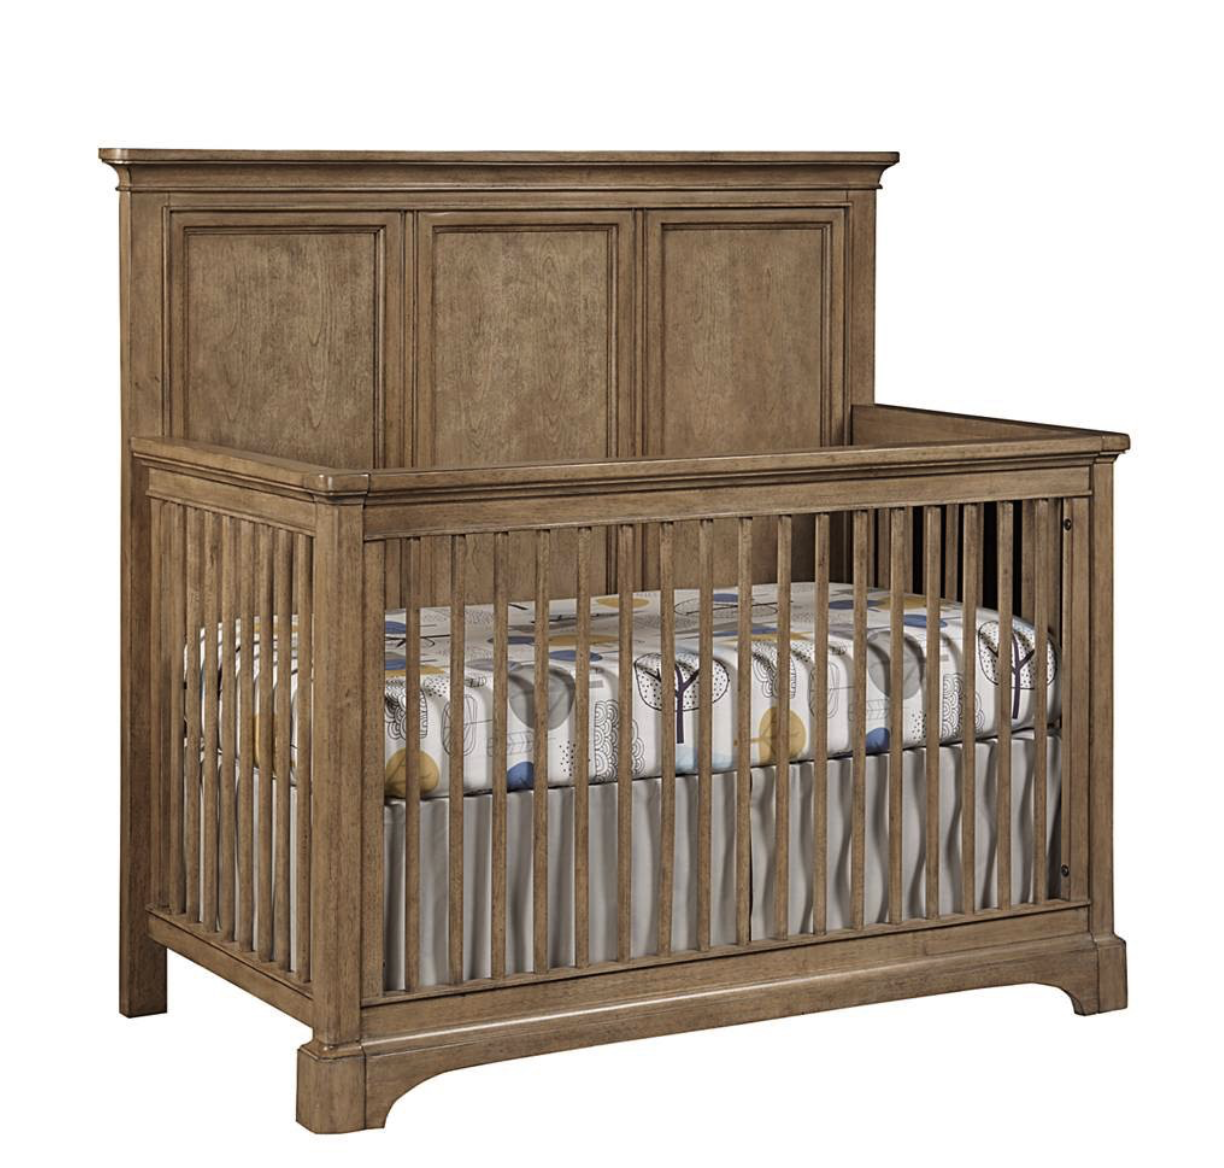 Chelsea Square Built To Grow Crib 